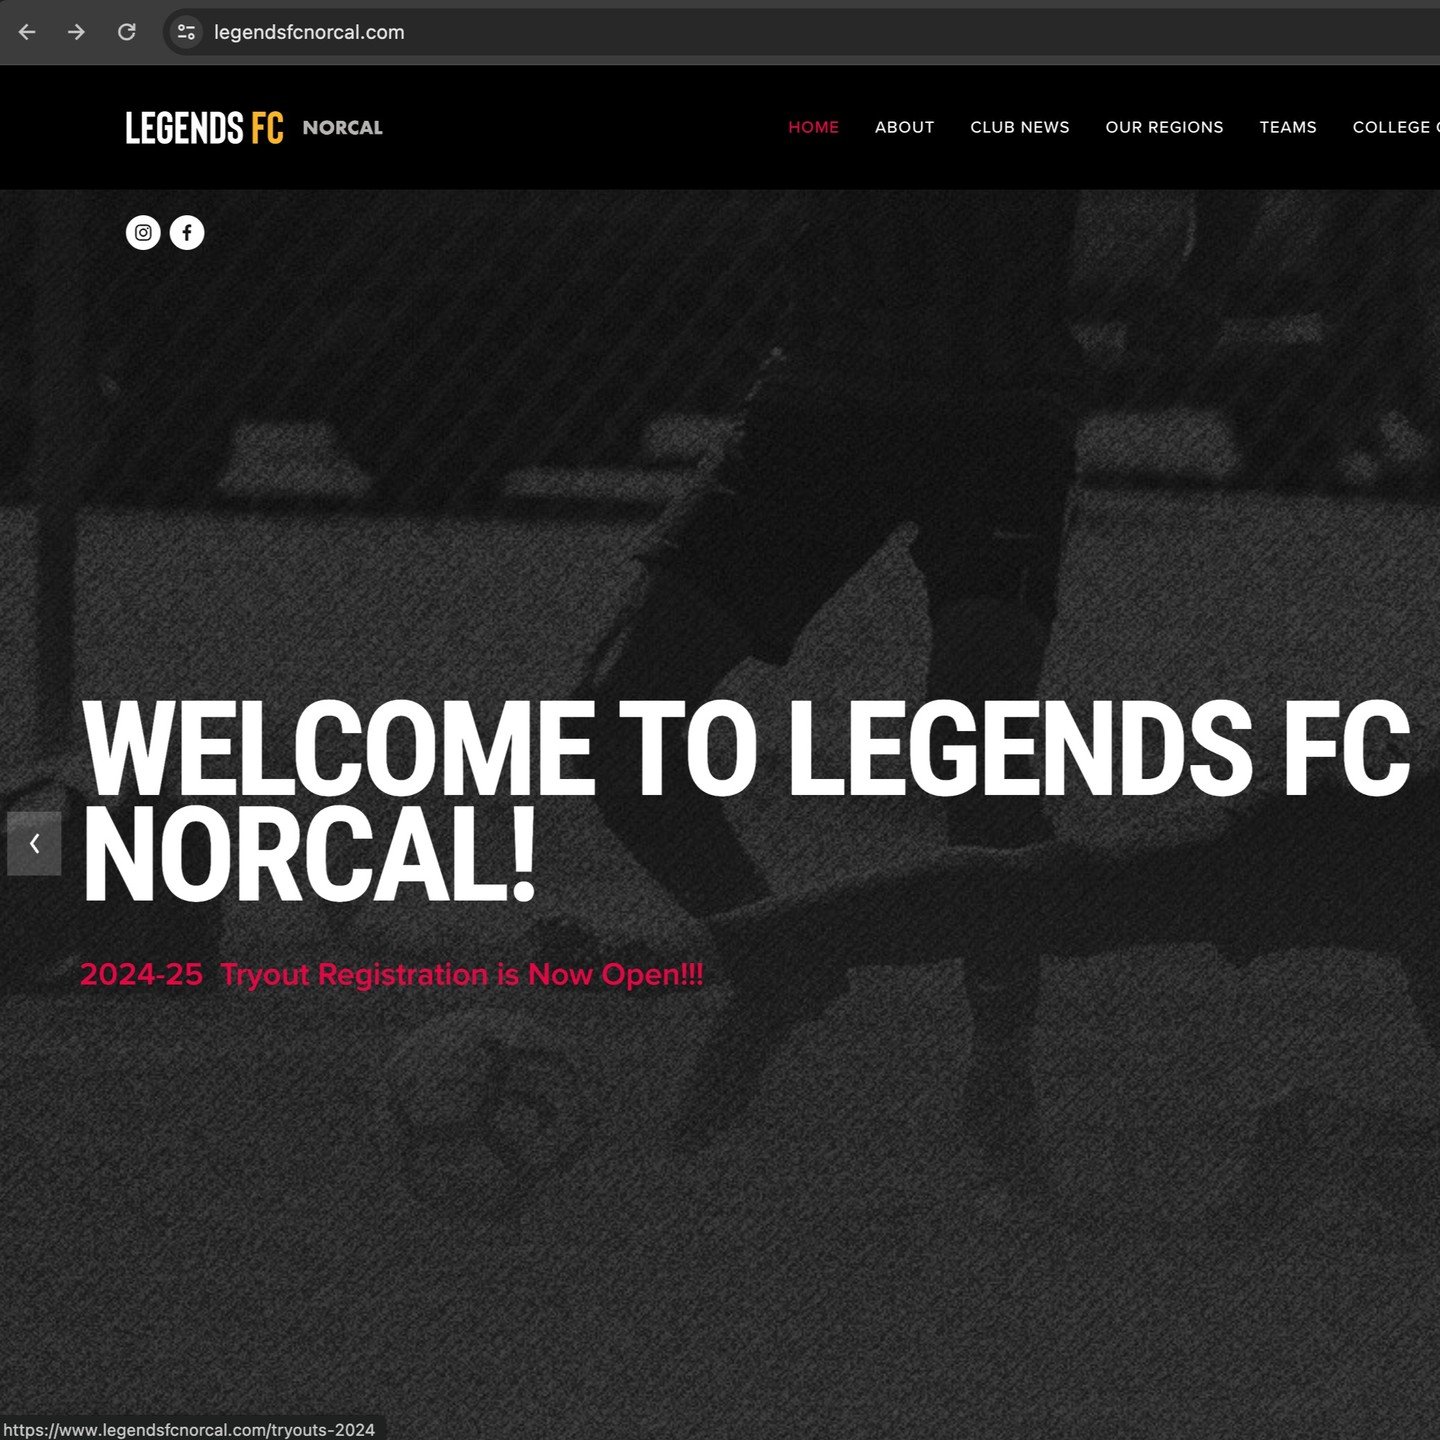 Get ready for Legends FC Norcal (SJ)!!! Register for 2018-2006 tryouts at https://www.legendsfcnorcal.com/tryouts-2024